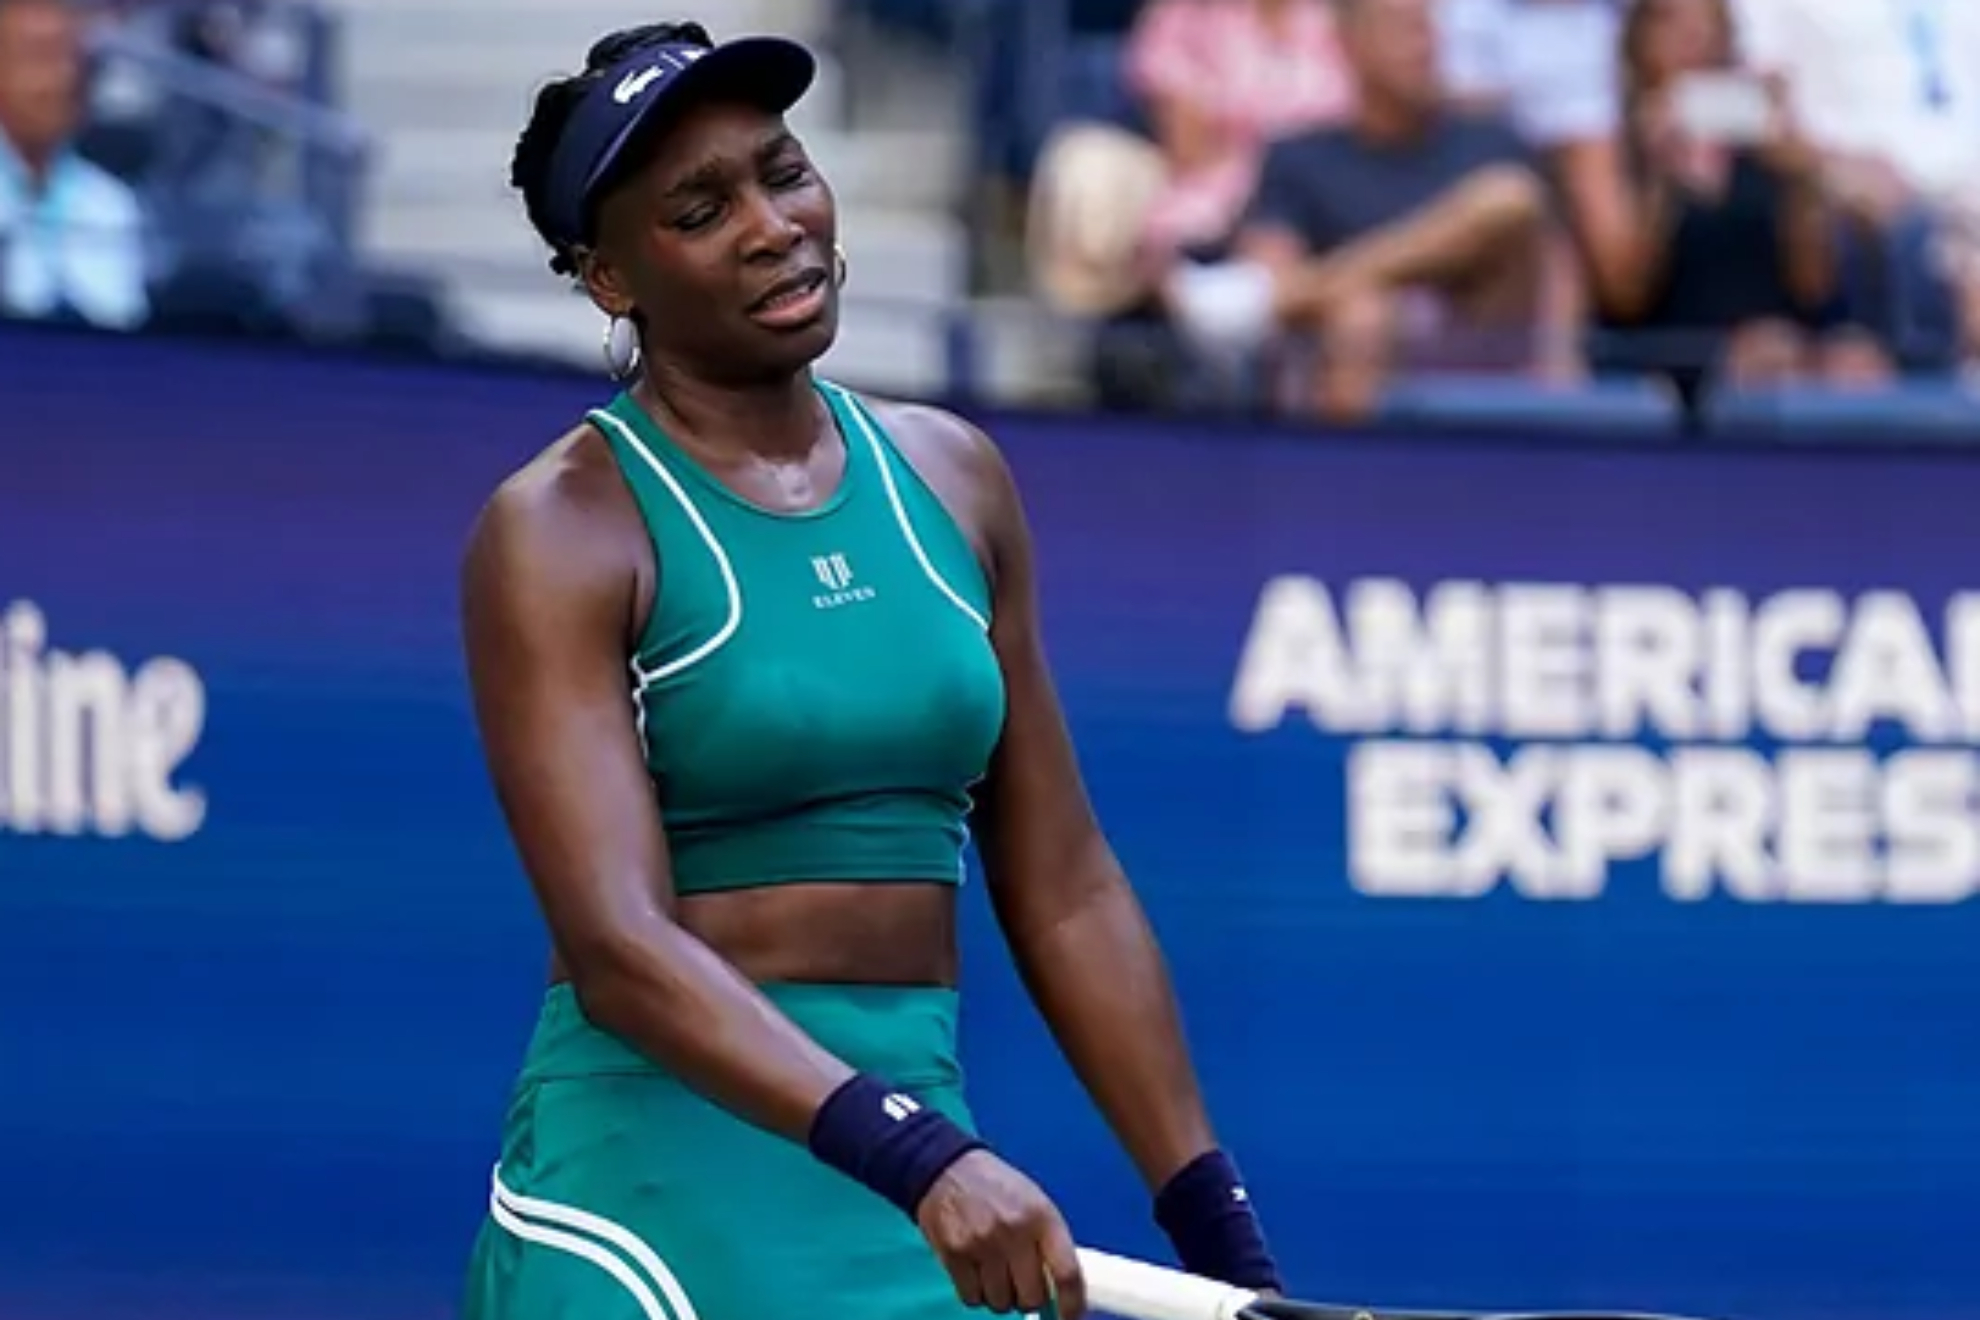 Venus Williams could not copy the feat of her sister Serena and was eliminated in her debut at the US Open Marca